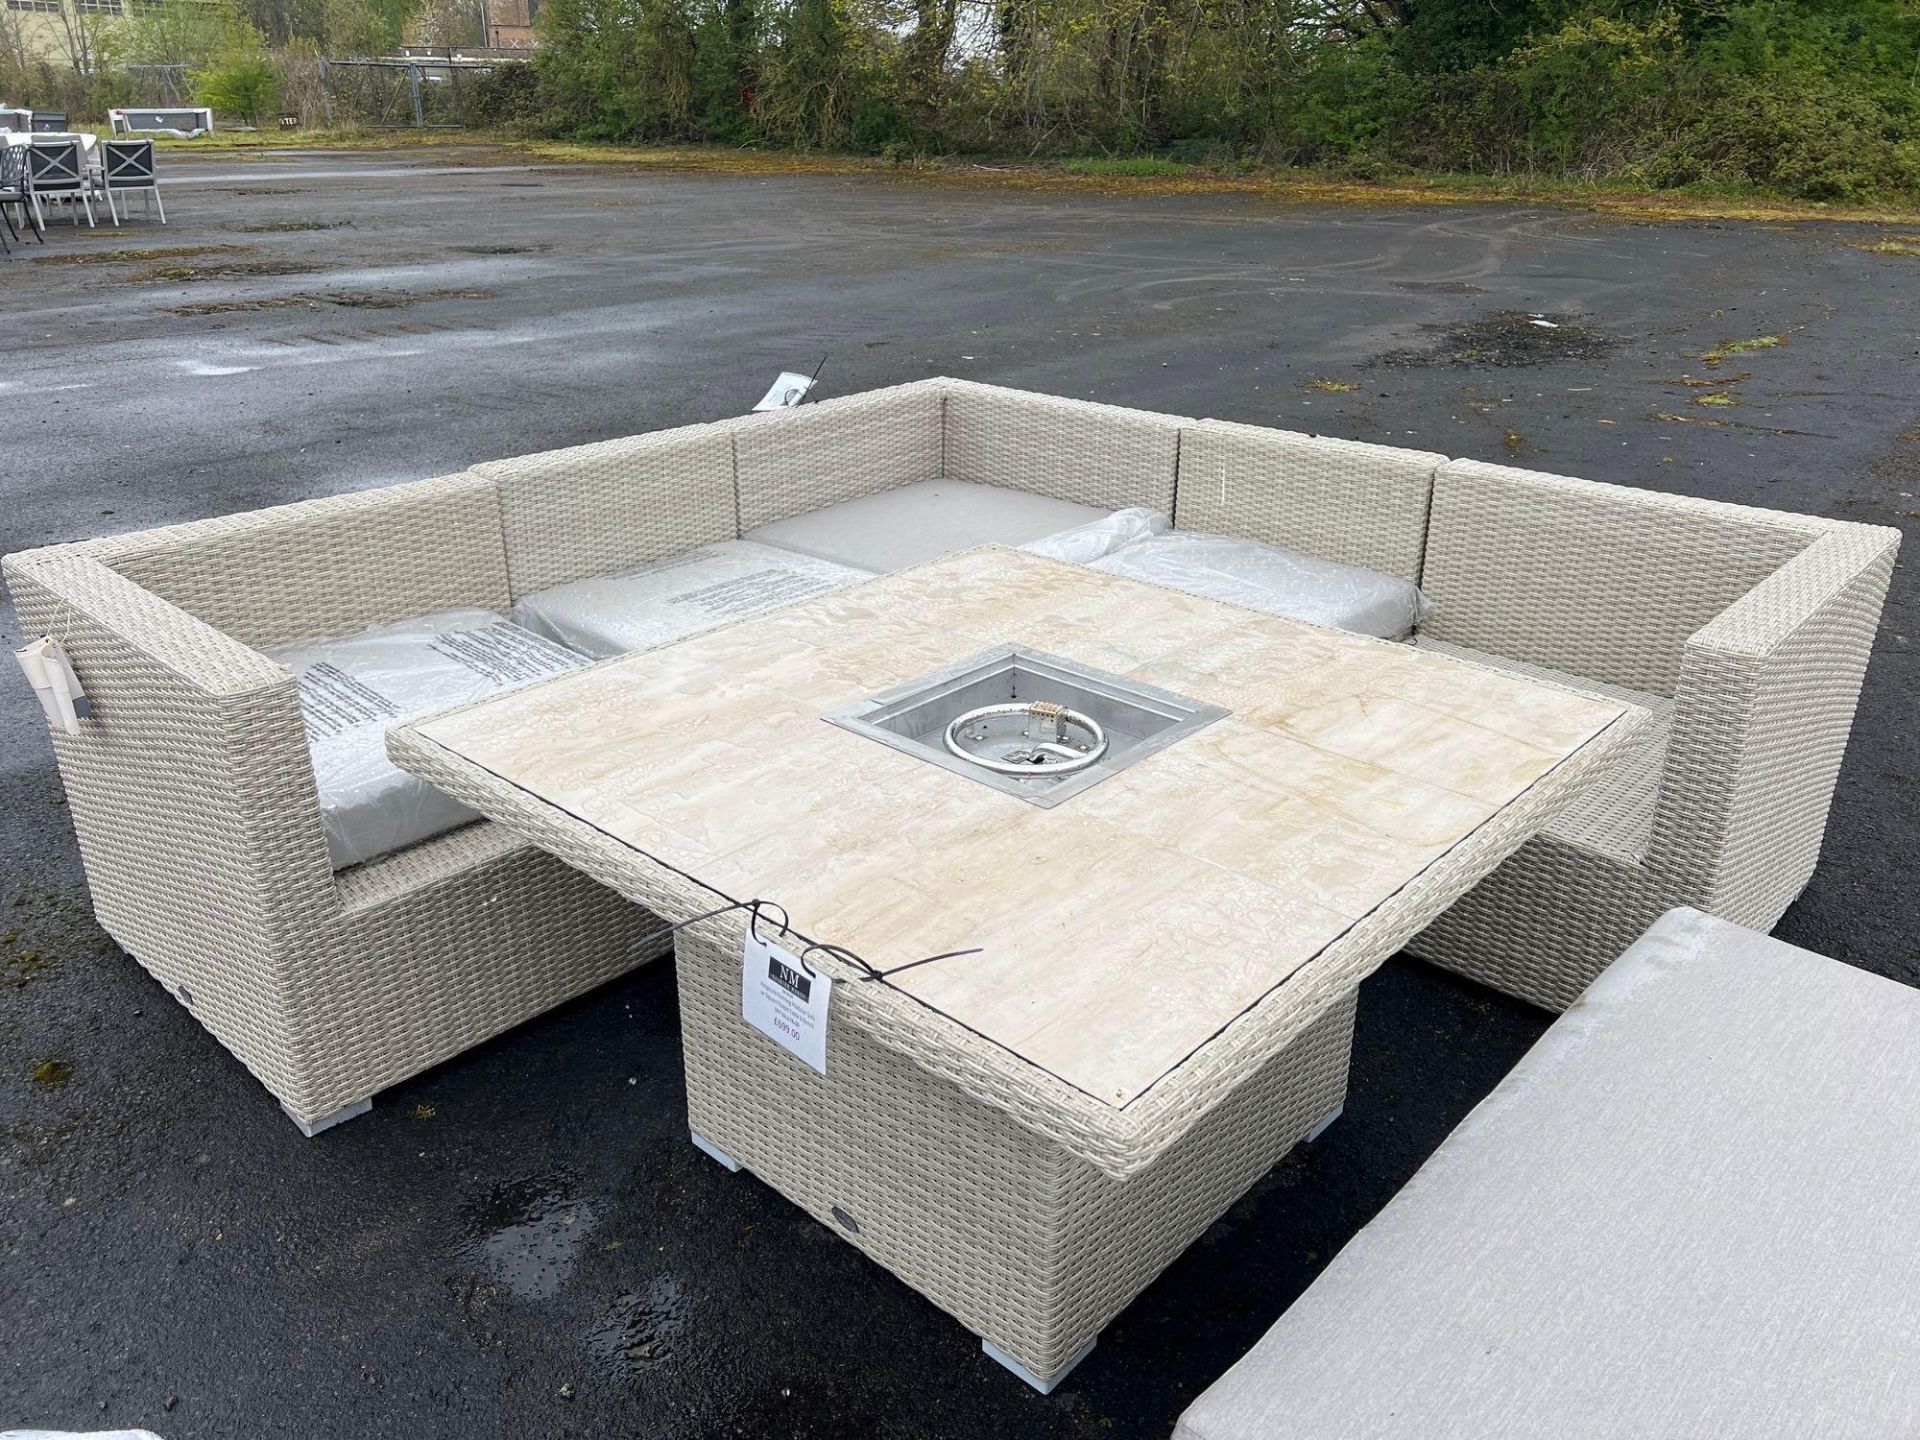 A125 Kingscote Nutmeg Modular Sofa With Square Firepit Table and Bench